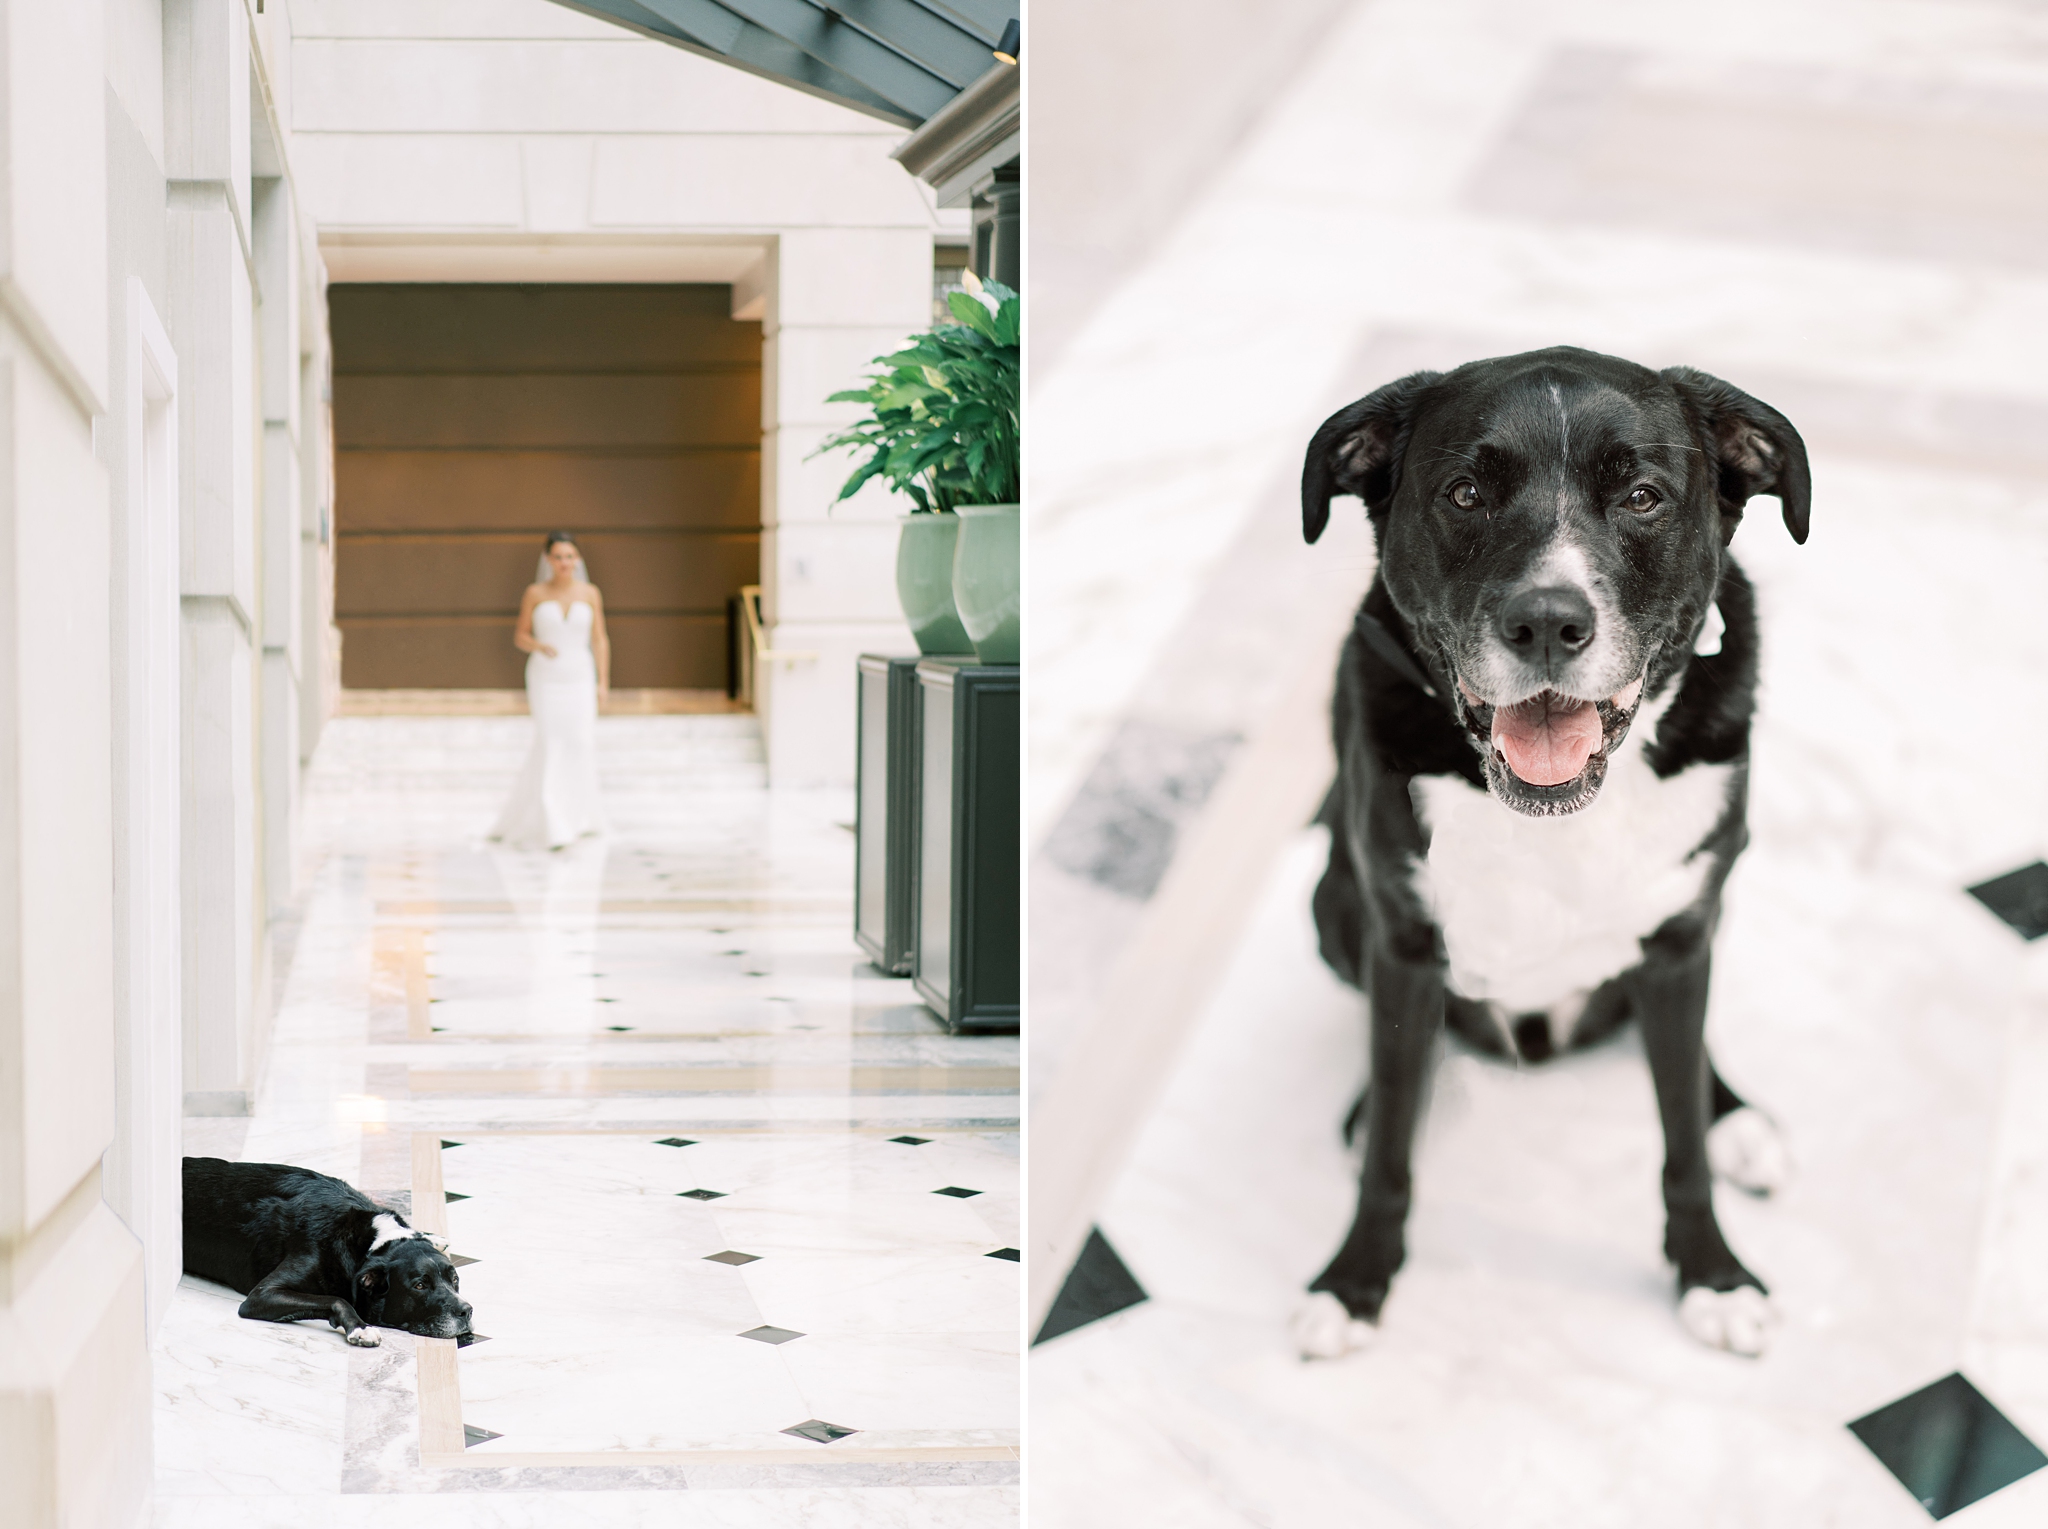 To wrap up the 2019 season, this Washington, DC wedding photographer is sharing superlatives from the most stunning affairs of the year! 